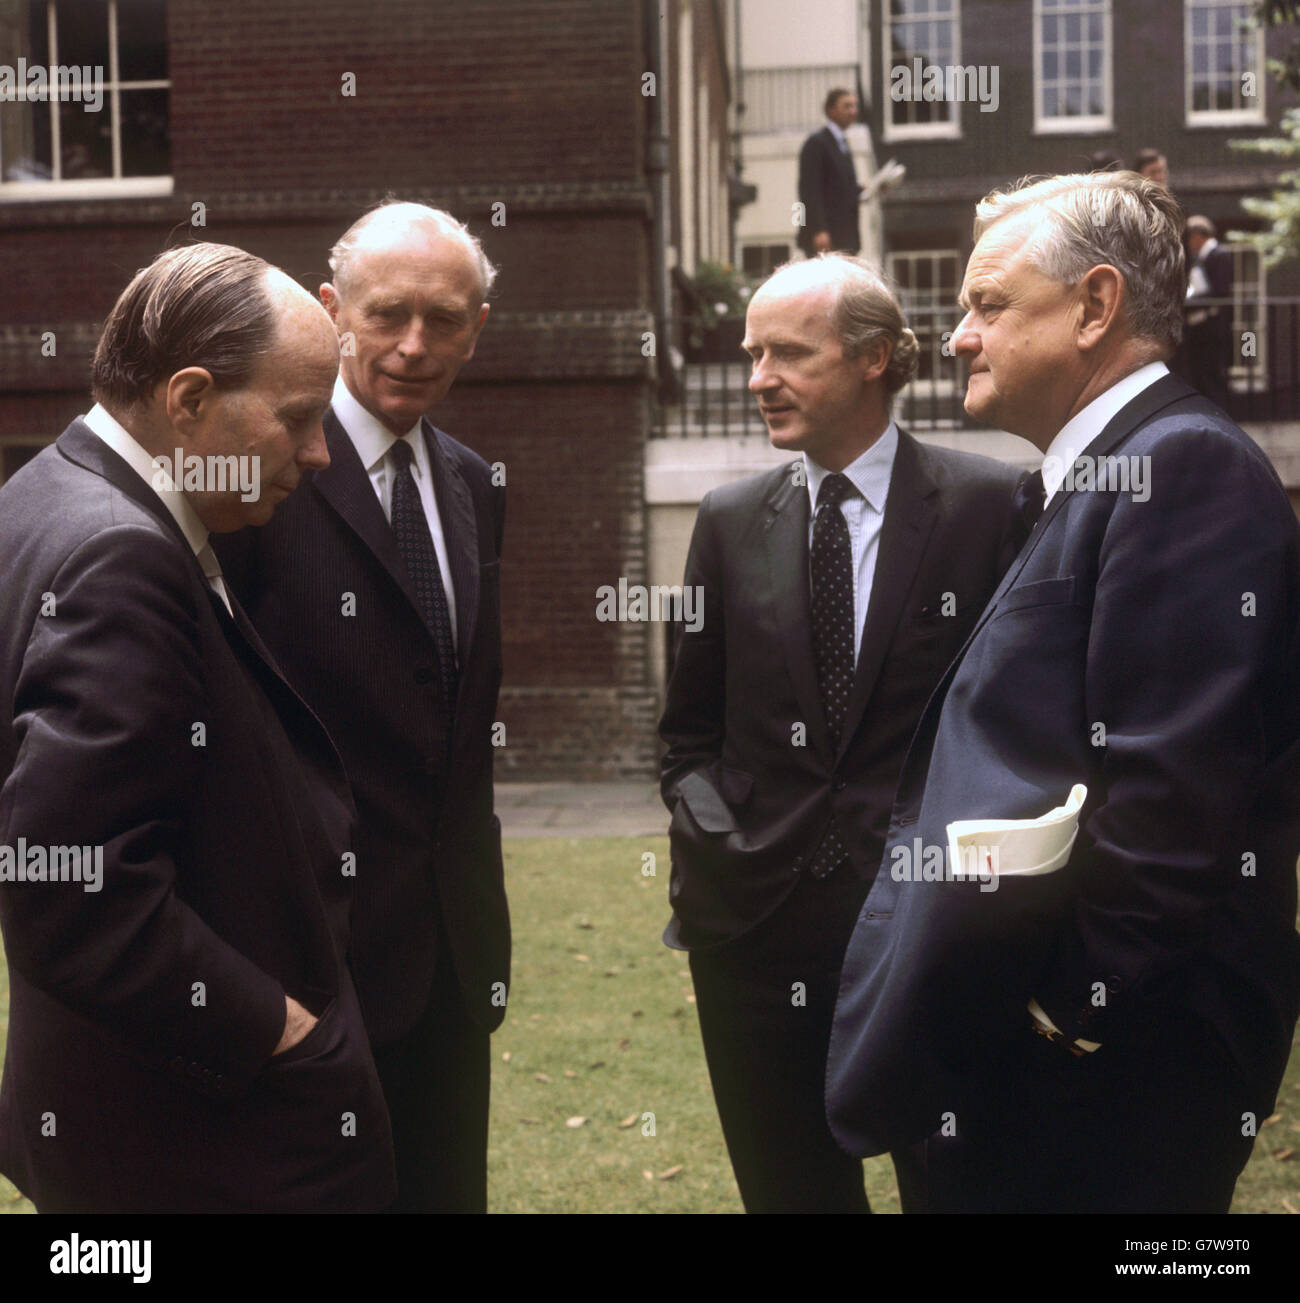 The Cabinet in the Garden of No. 10. (l-r) Iain Macleod (Chancellor of the Exchequer), Sir Alec Douglas-Home (Foreign Secretary), Anthony Barber (Chancellor of the Duchy of Lancaster), and Quintin Hogg (Lord Chancellor). Stock Photo